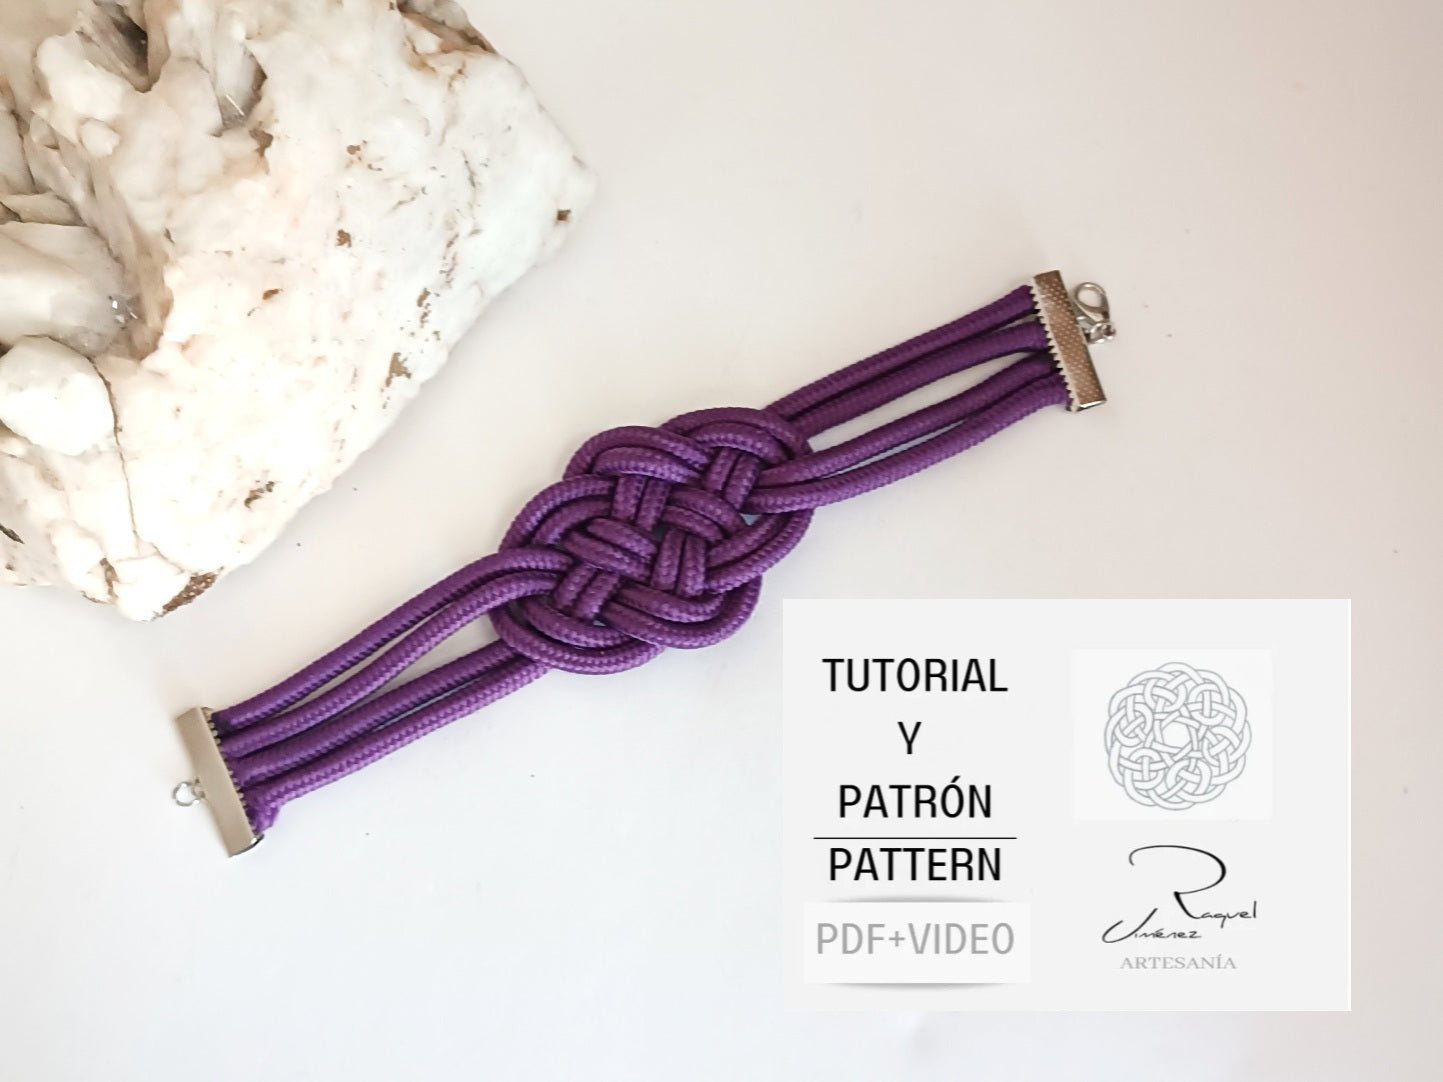 How to tie a turks head sailor knot bracelet by Julia - YouTube